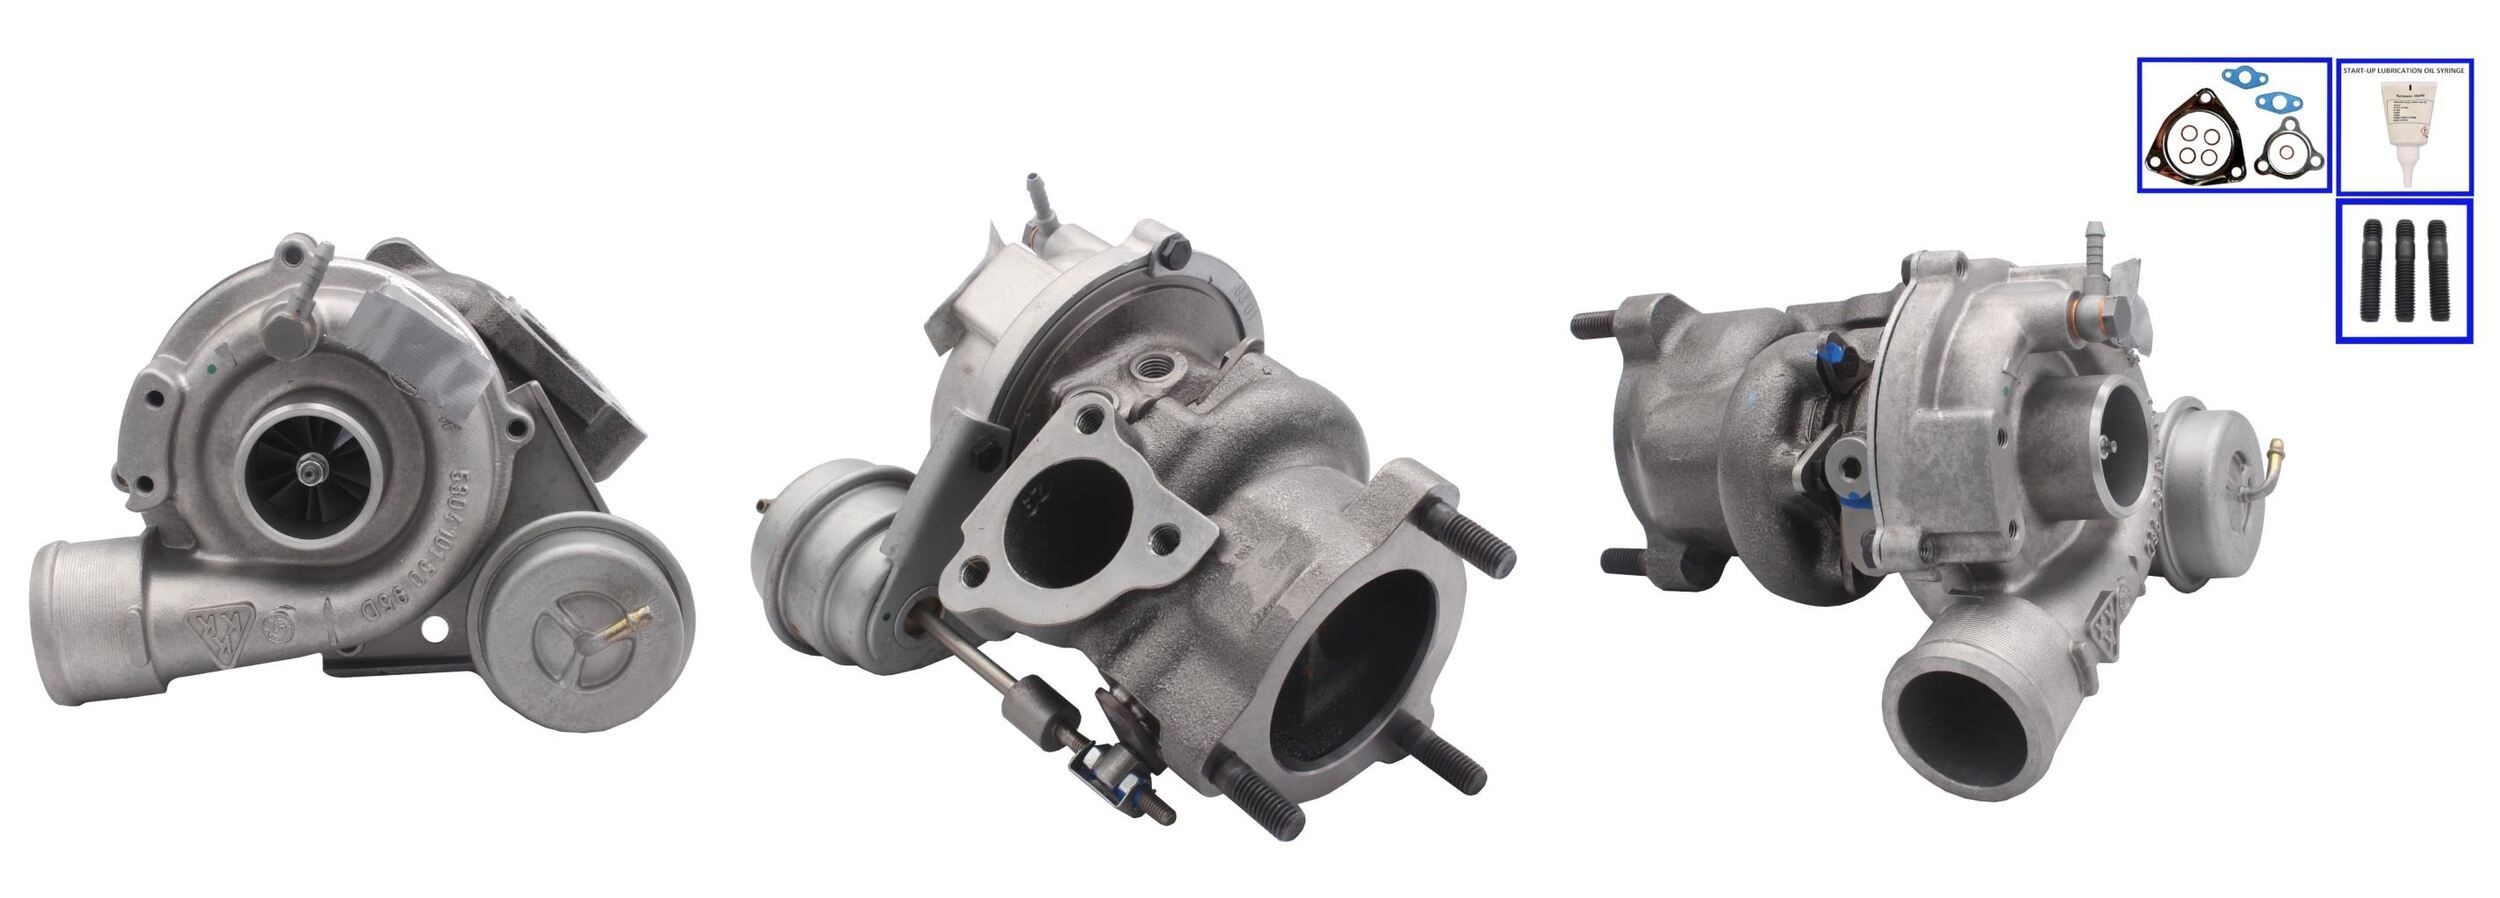 LUCAS LTRPA53039880029 Turbocharger Exhaust Turbocharger, Pneumatically controlled actuator, with gaskets/seals